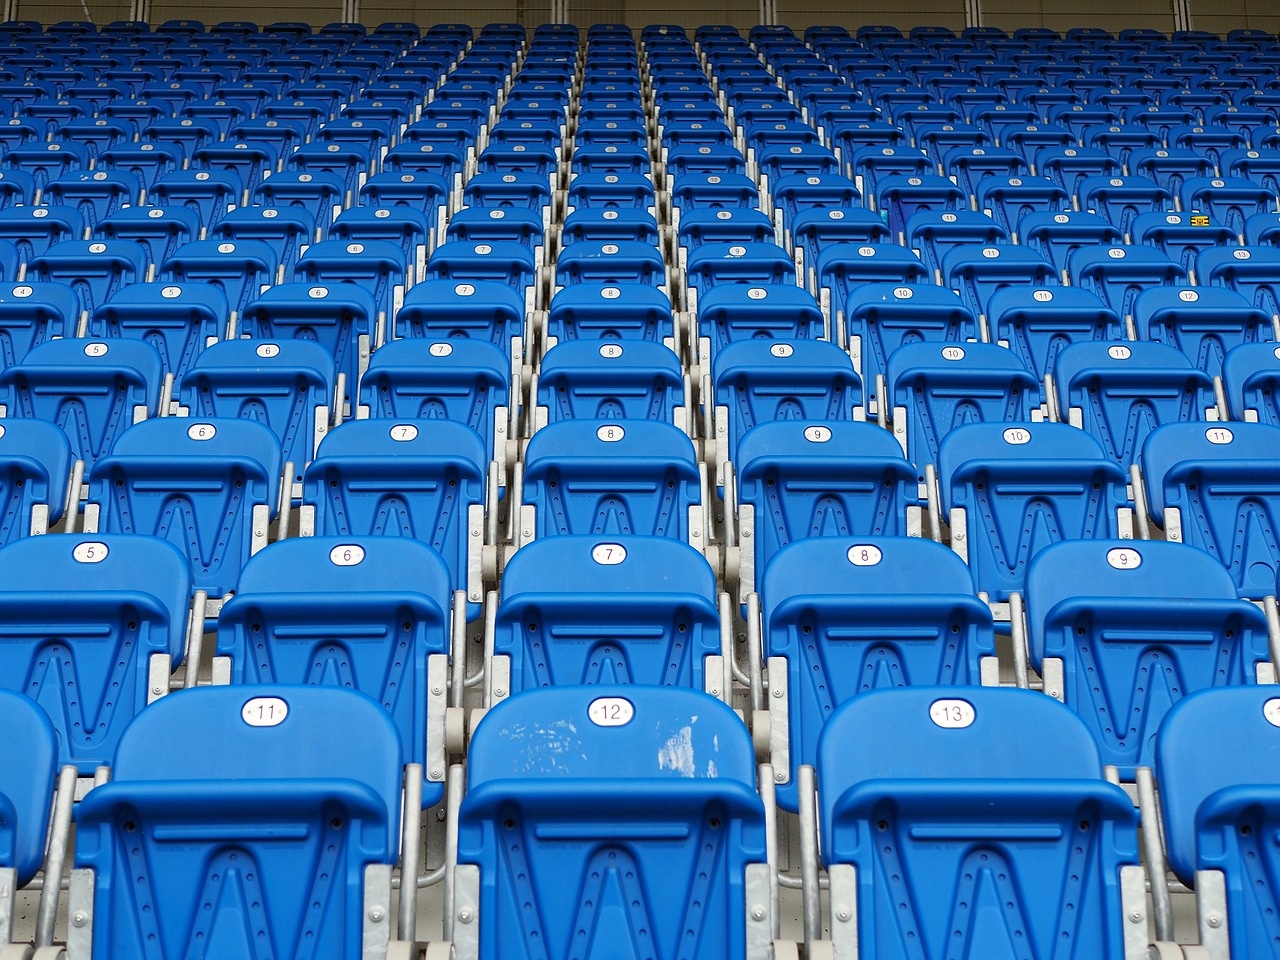 seats football placement free photo